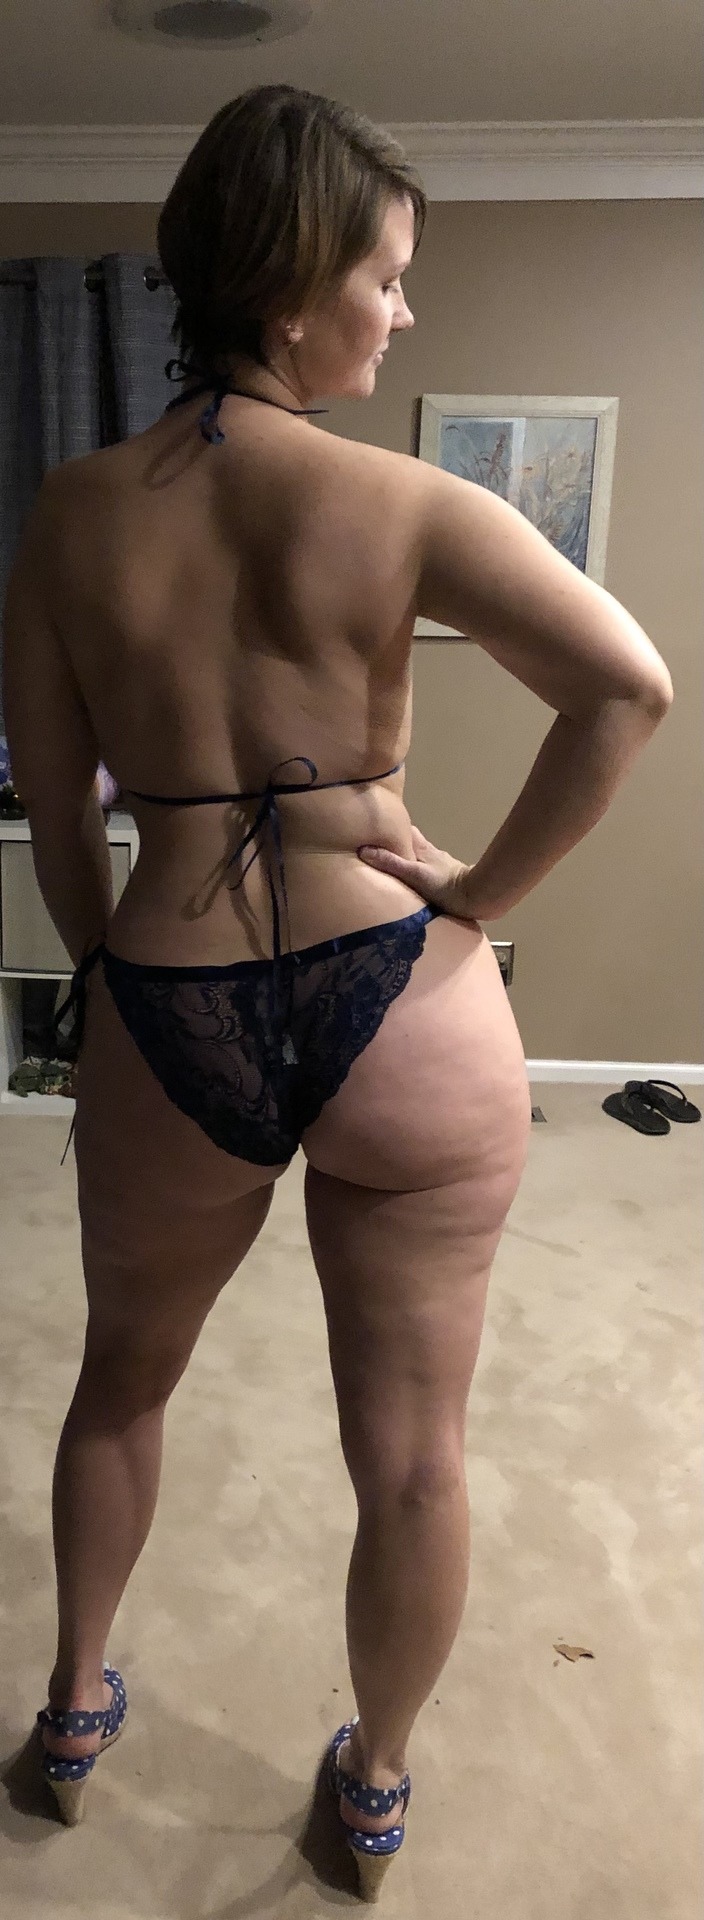 Pawg wive